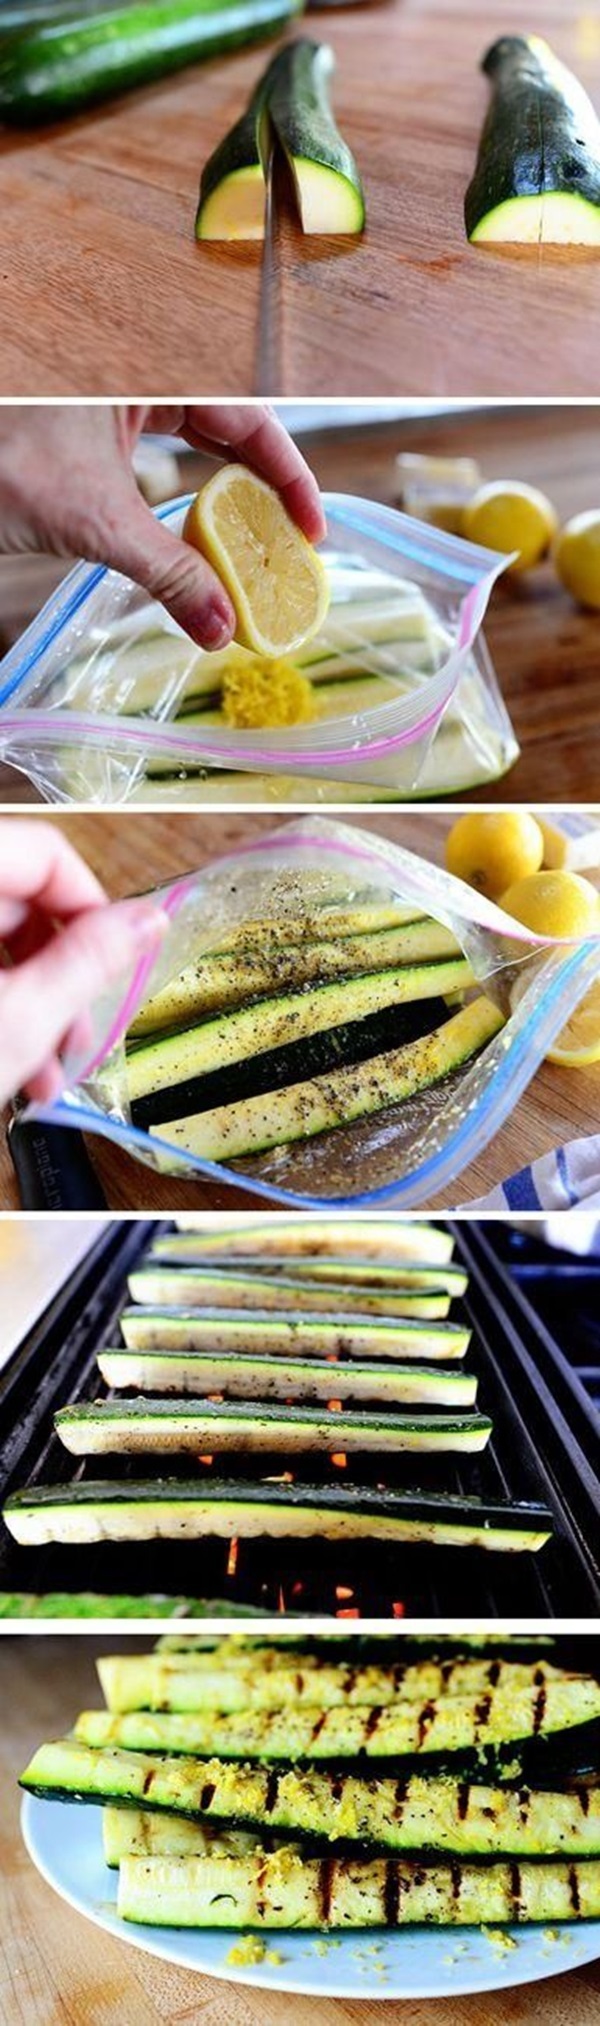 Clever Cooking Hacks (8)